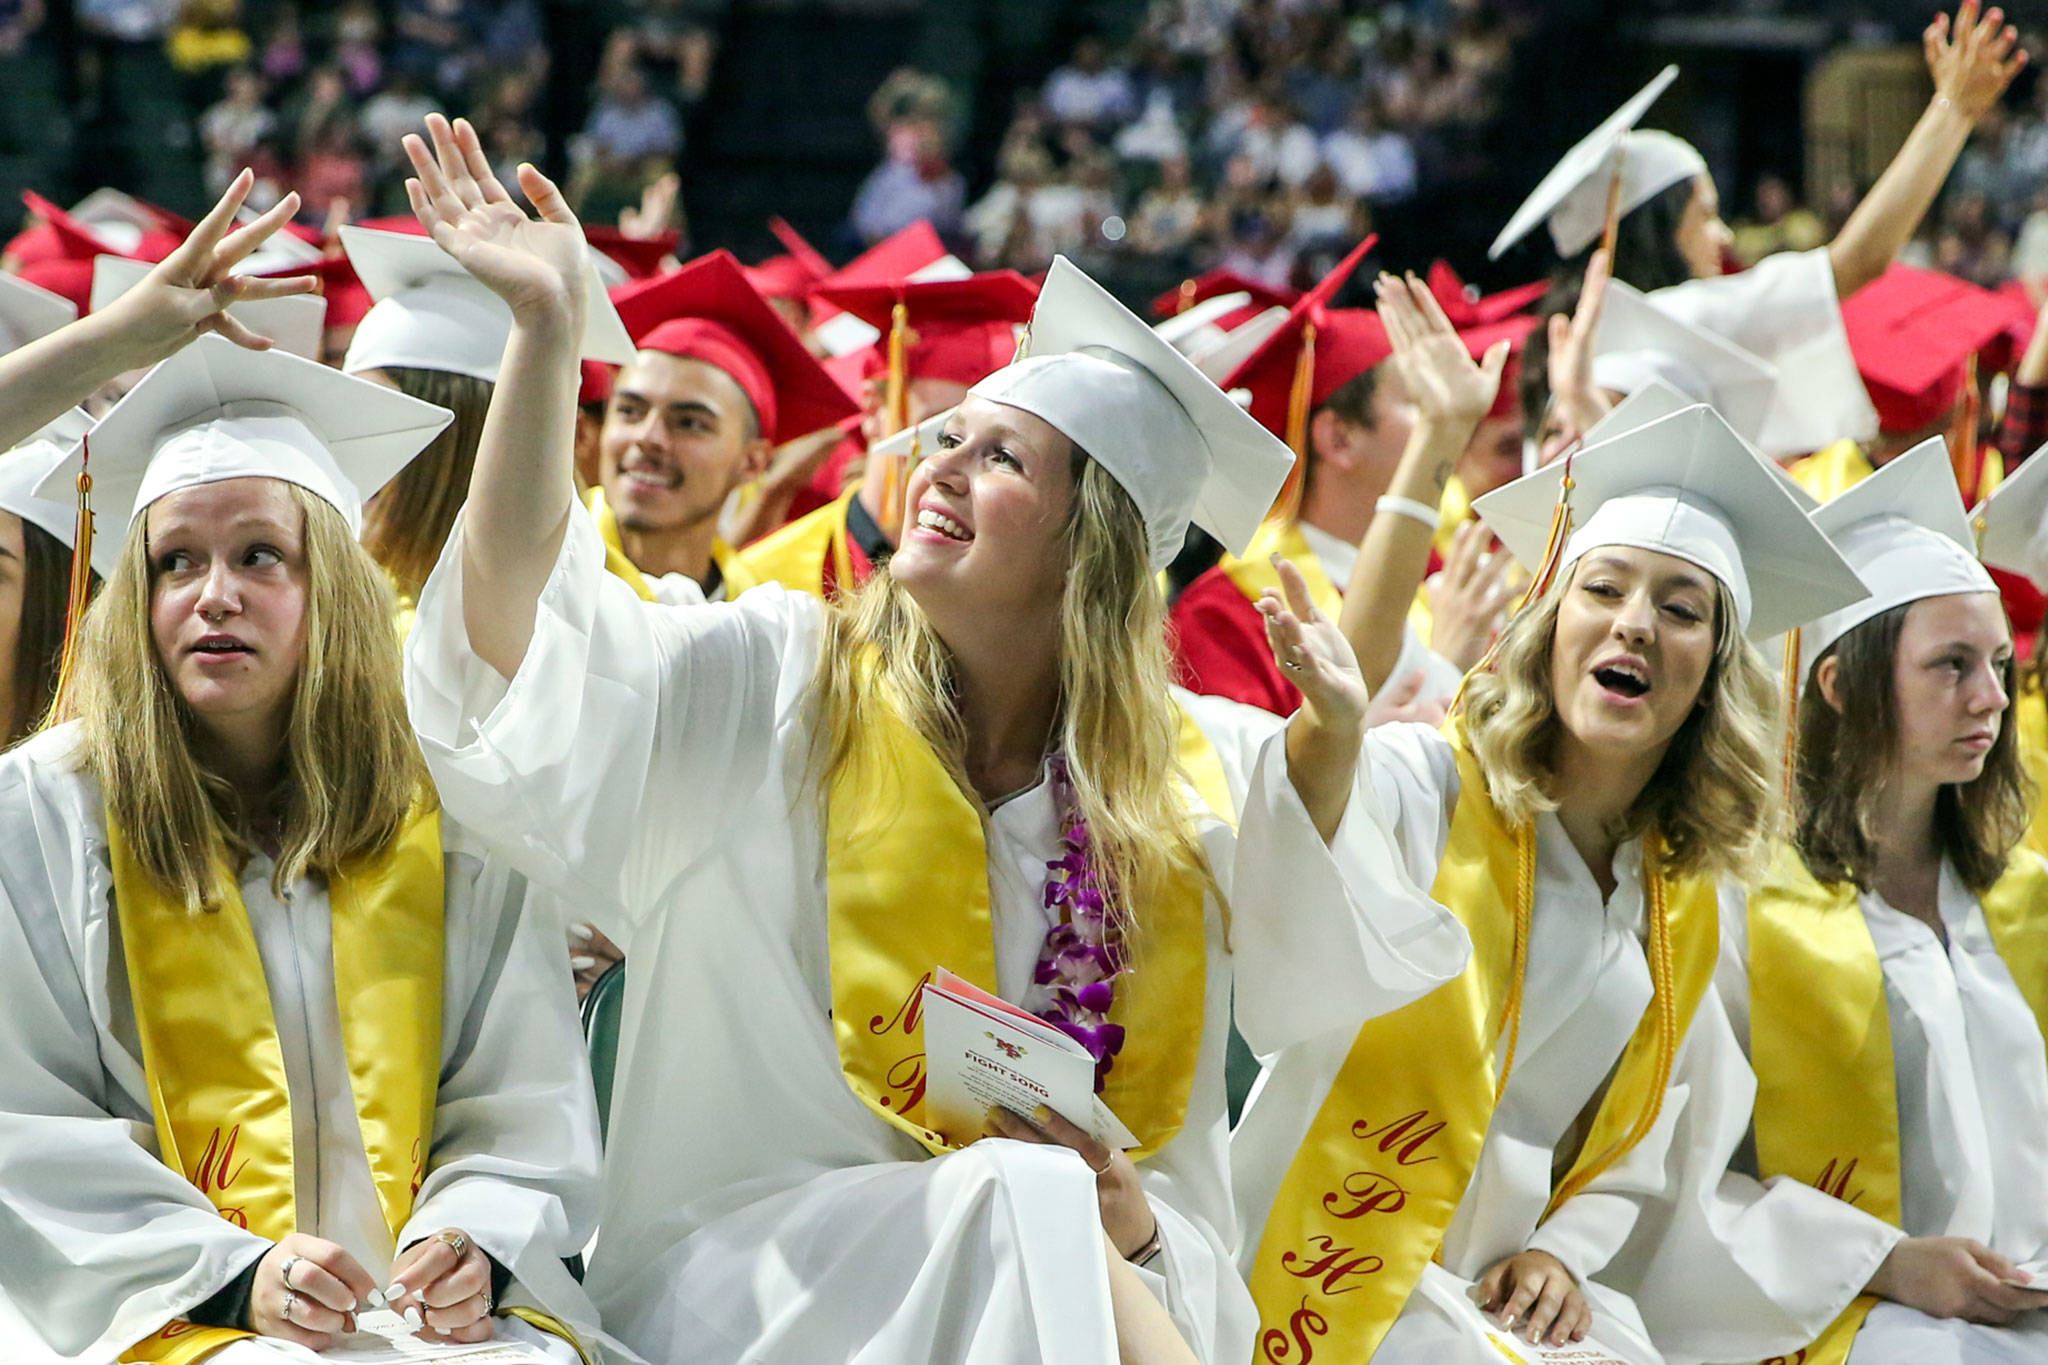 Scenes from the graduation of Marysville-Pilchuck High School’s Class of 2019 Wednesday afternoon at Angel of the Winds Arena in Everett on June 12, 2019. (Kevin Clark / The Herald)